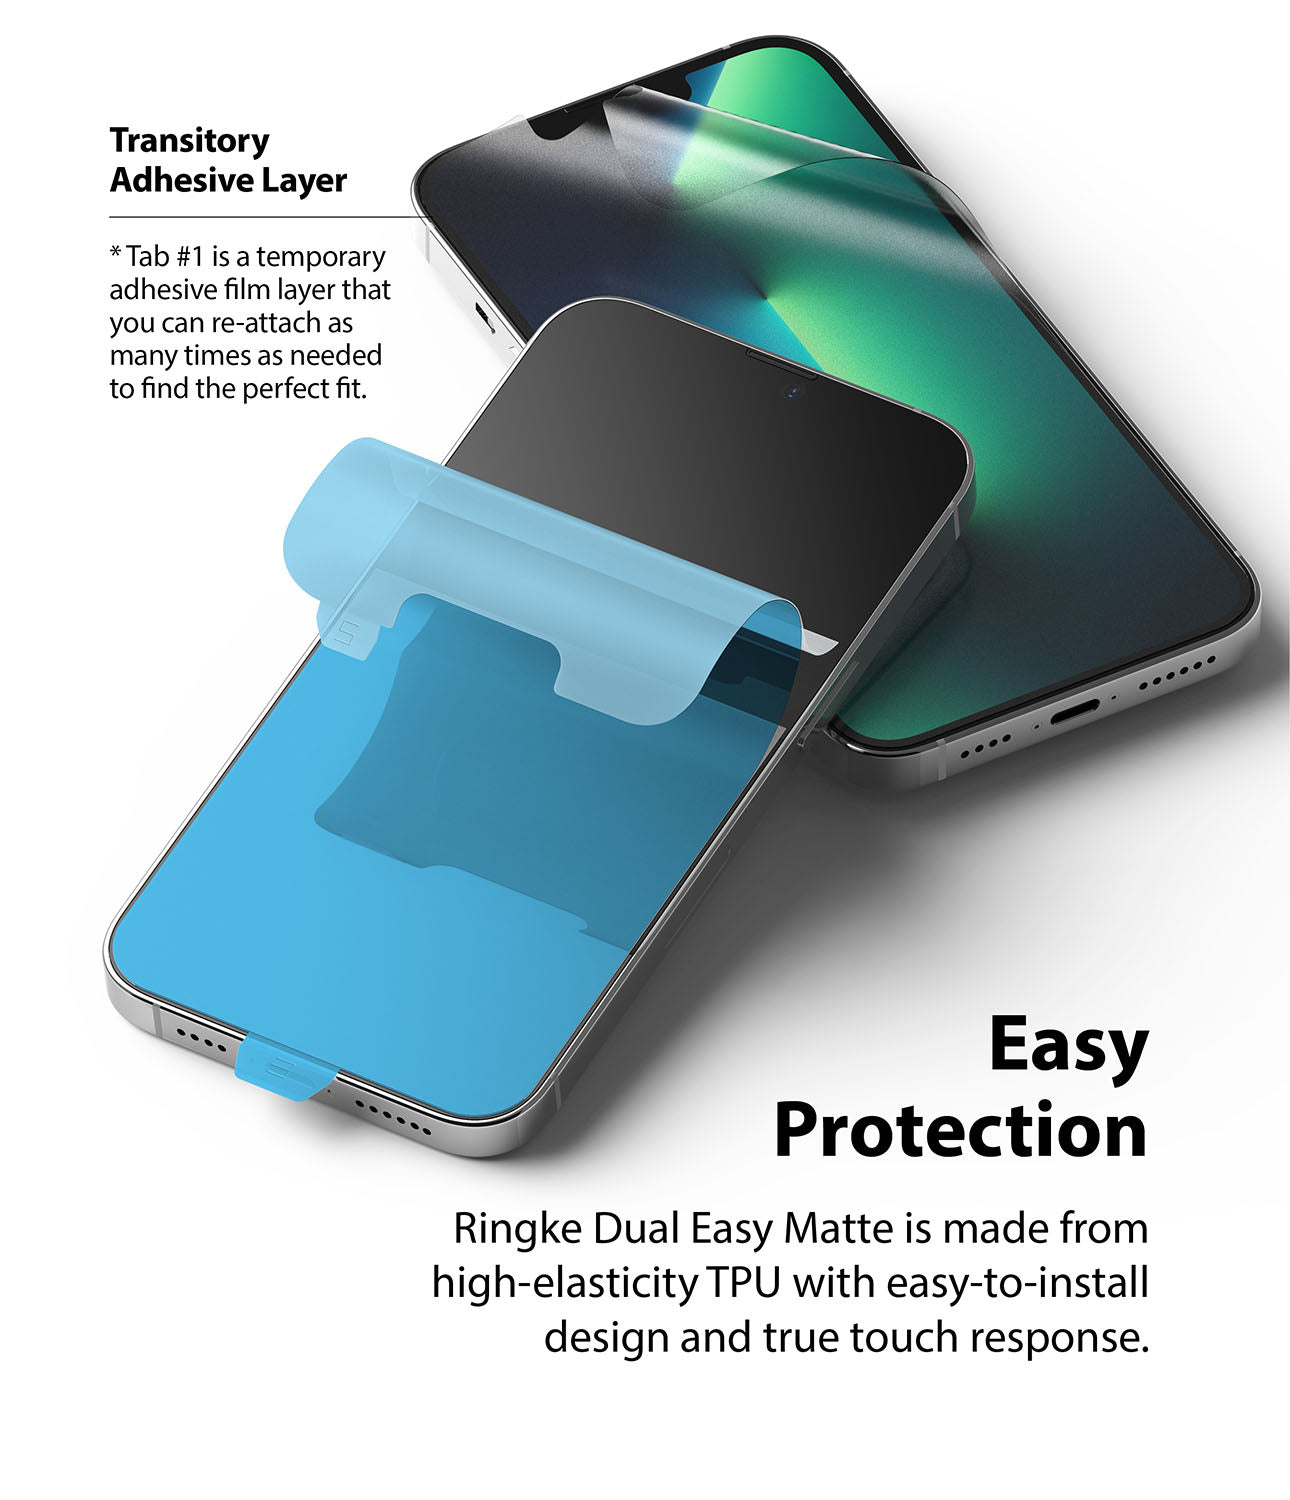 iPhone 13 Pro Max Screen Protector | Dual Easy Film Matte - Transitory Adhesive Layer. Easy Protection